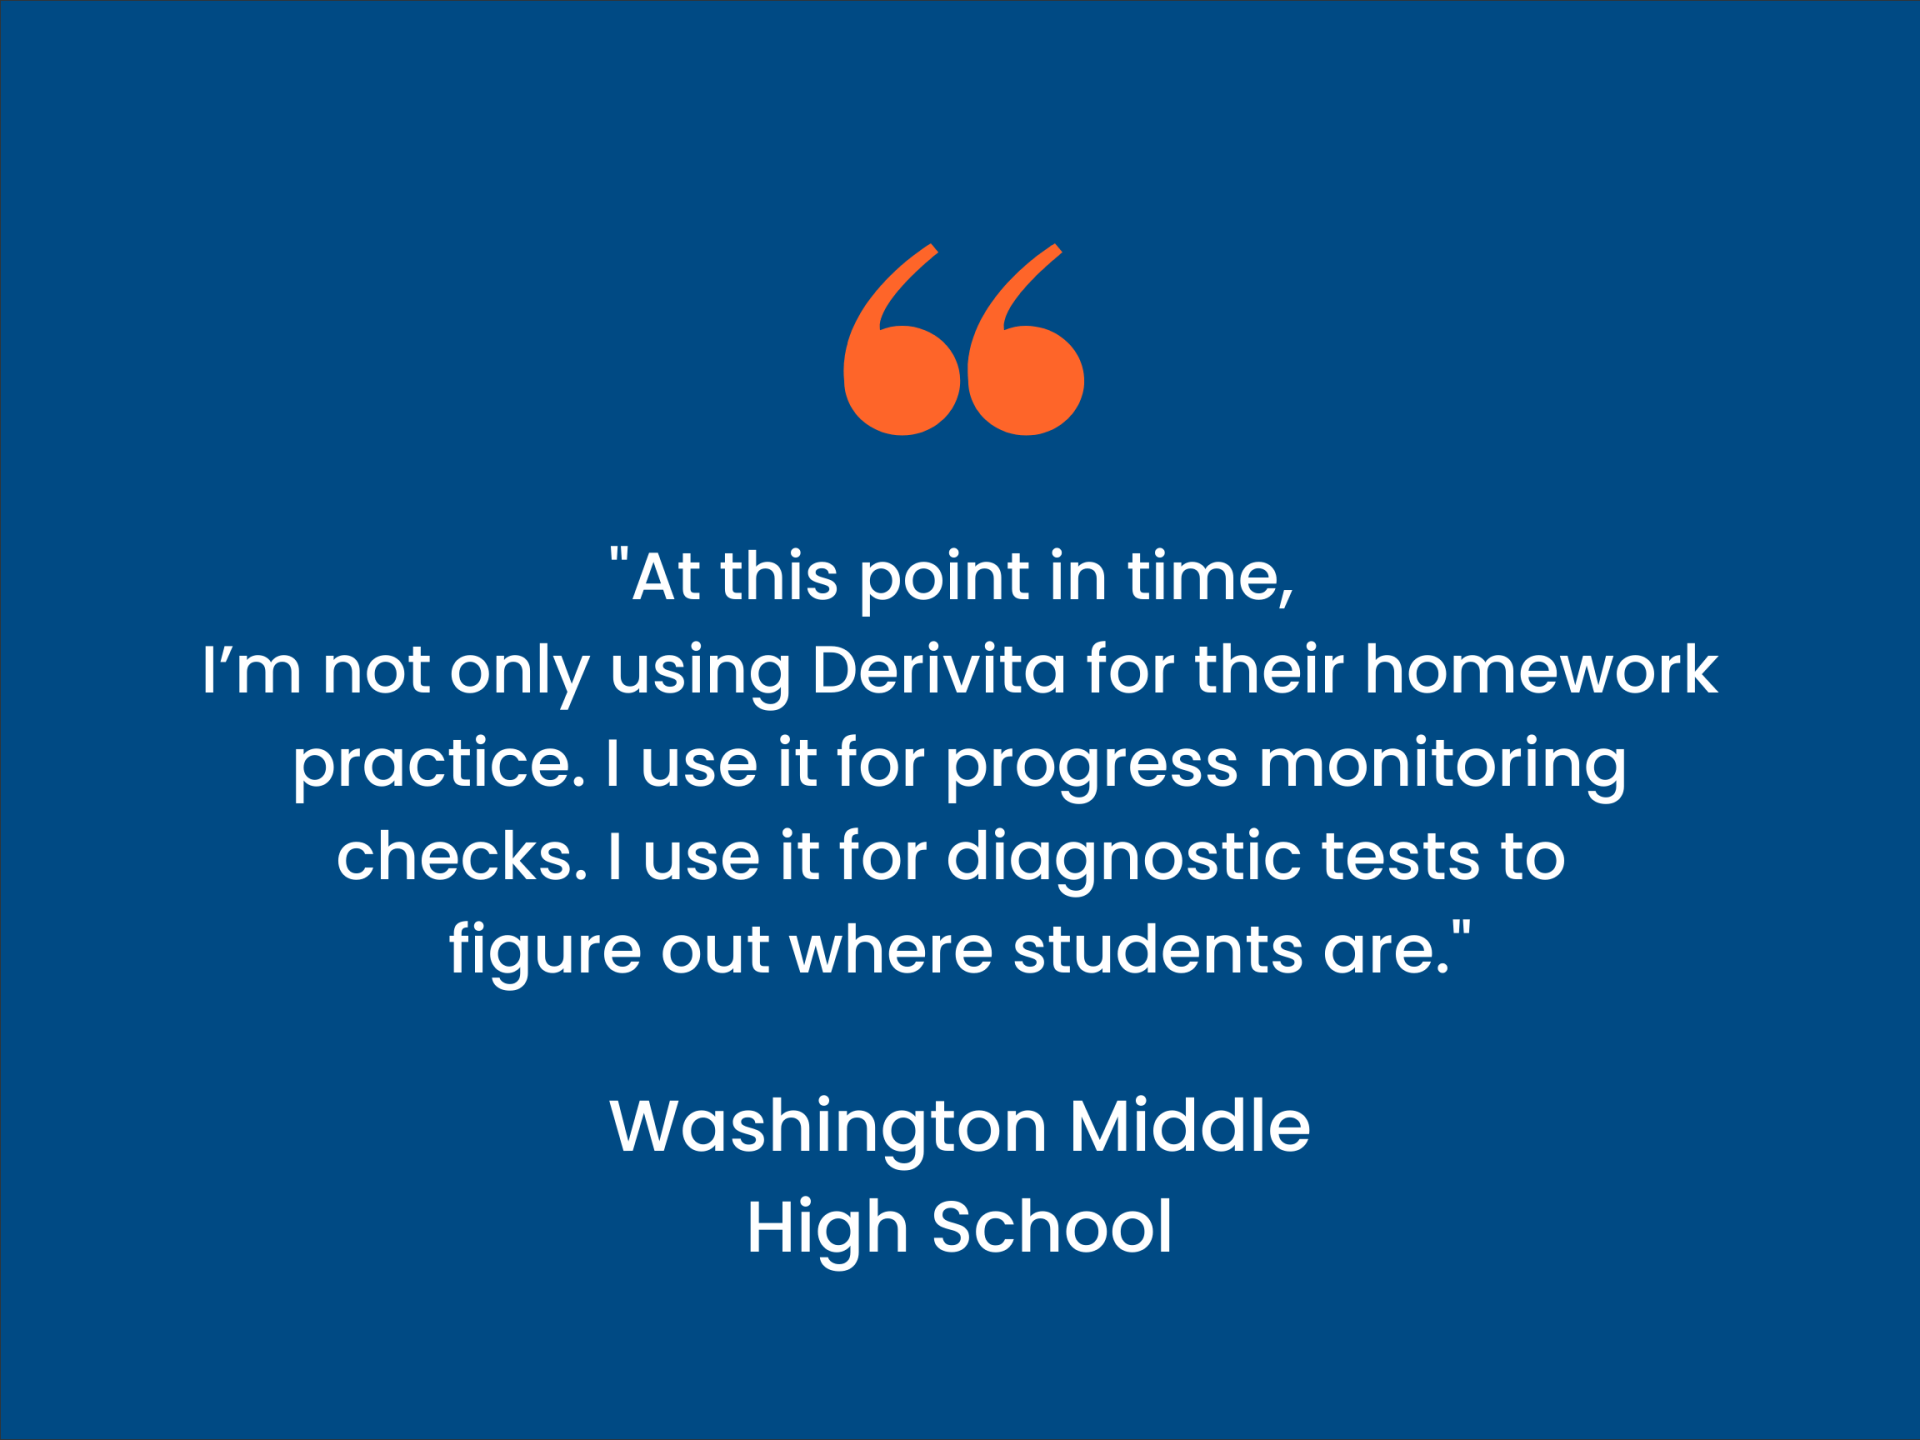 Quote card - Washington Middle High School says "At this point in time, I'm not only using Derivita for their homework practice. I use it for progress monitoring checks. I use it for diagnostic tests to figure out where students are."